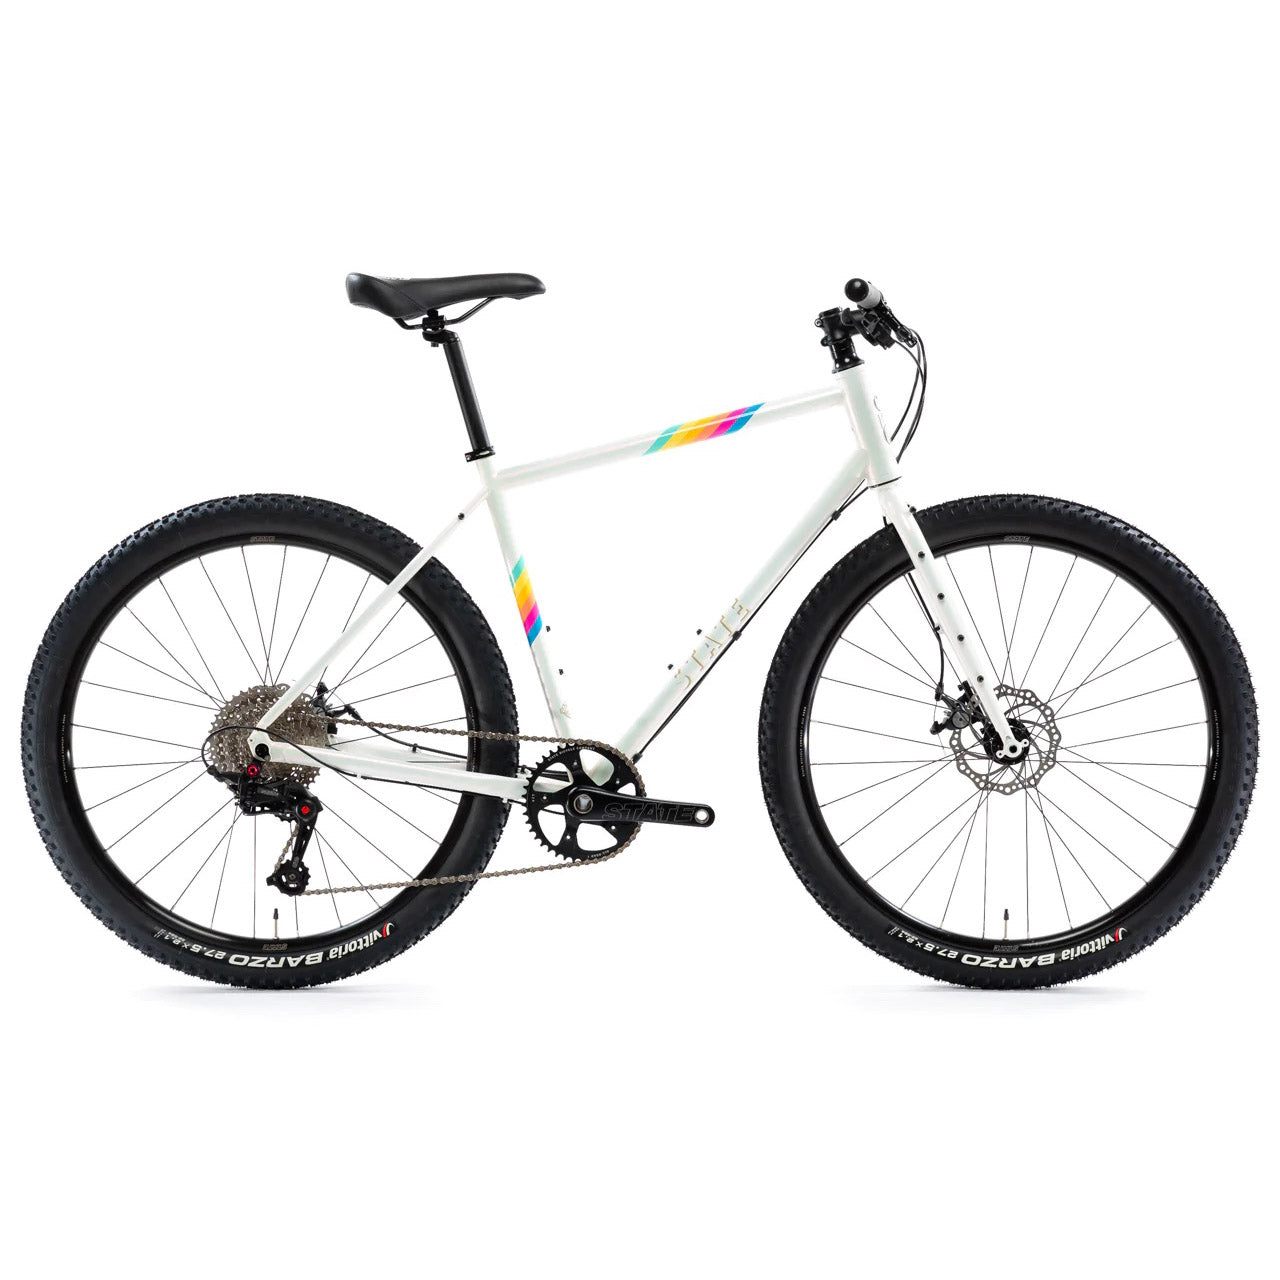 Hero image featuring the State 4130 All-Road bike in pearl white with colored stripes on the frame.